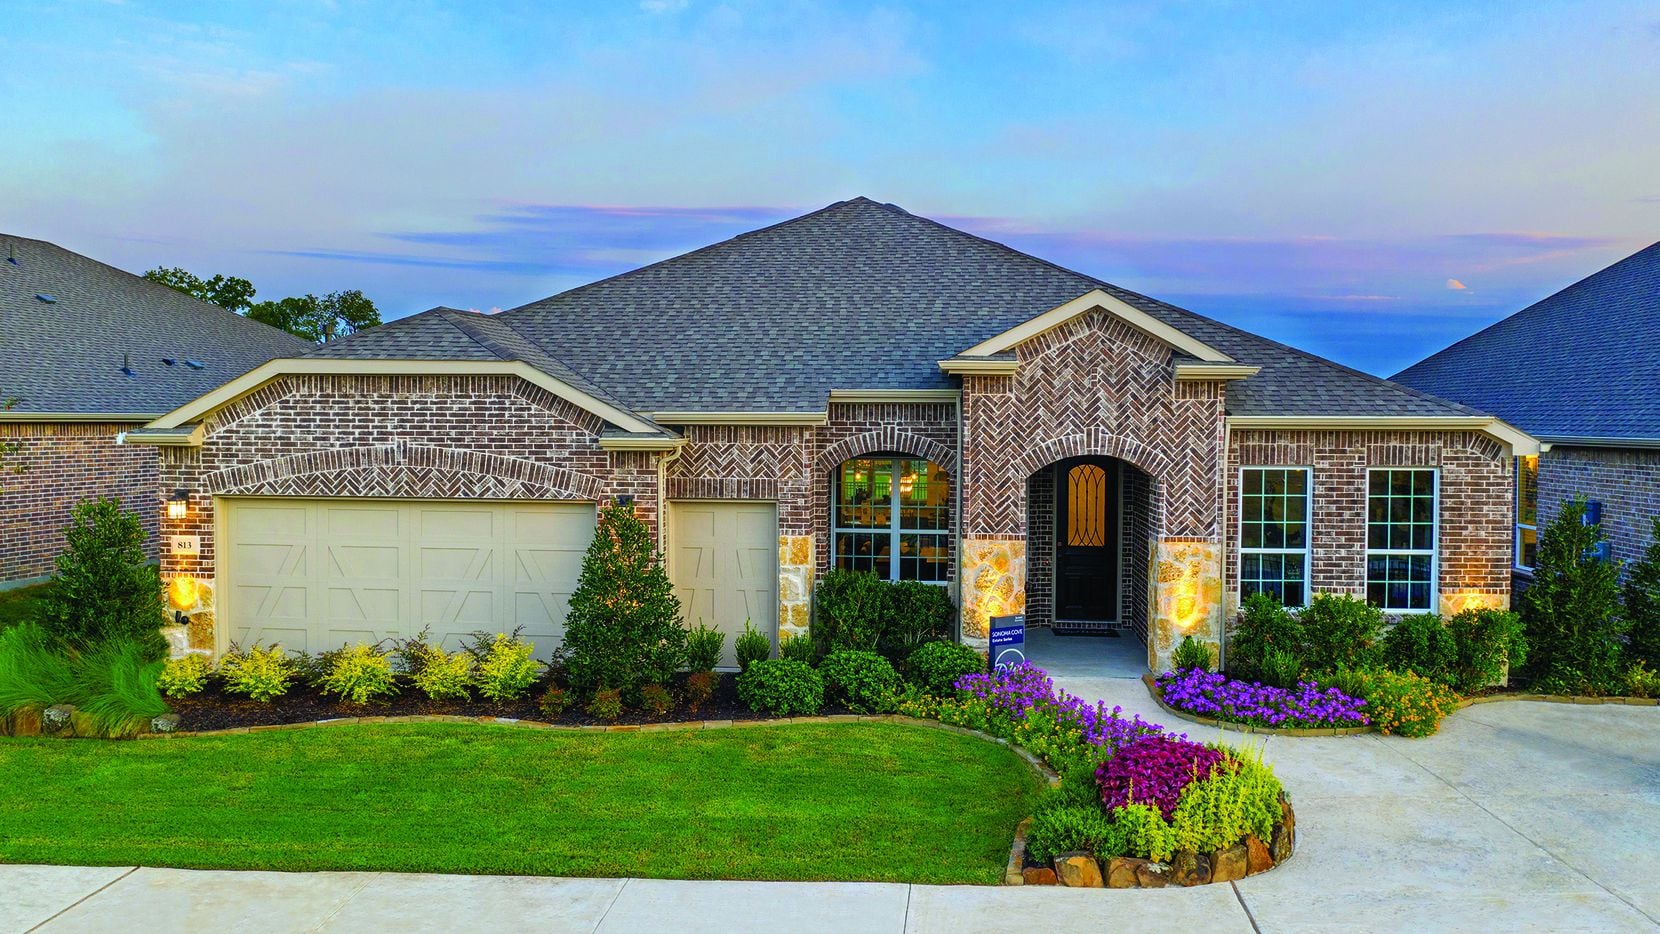 Del Webb’s 55-plus community at Trinity Falls offers one-story floor plans with 1,300 to...